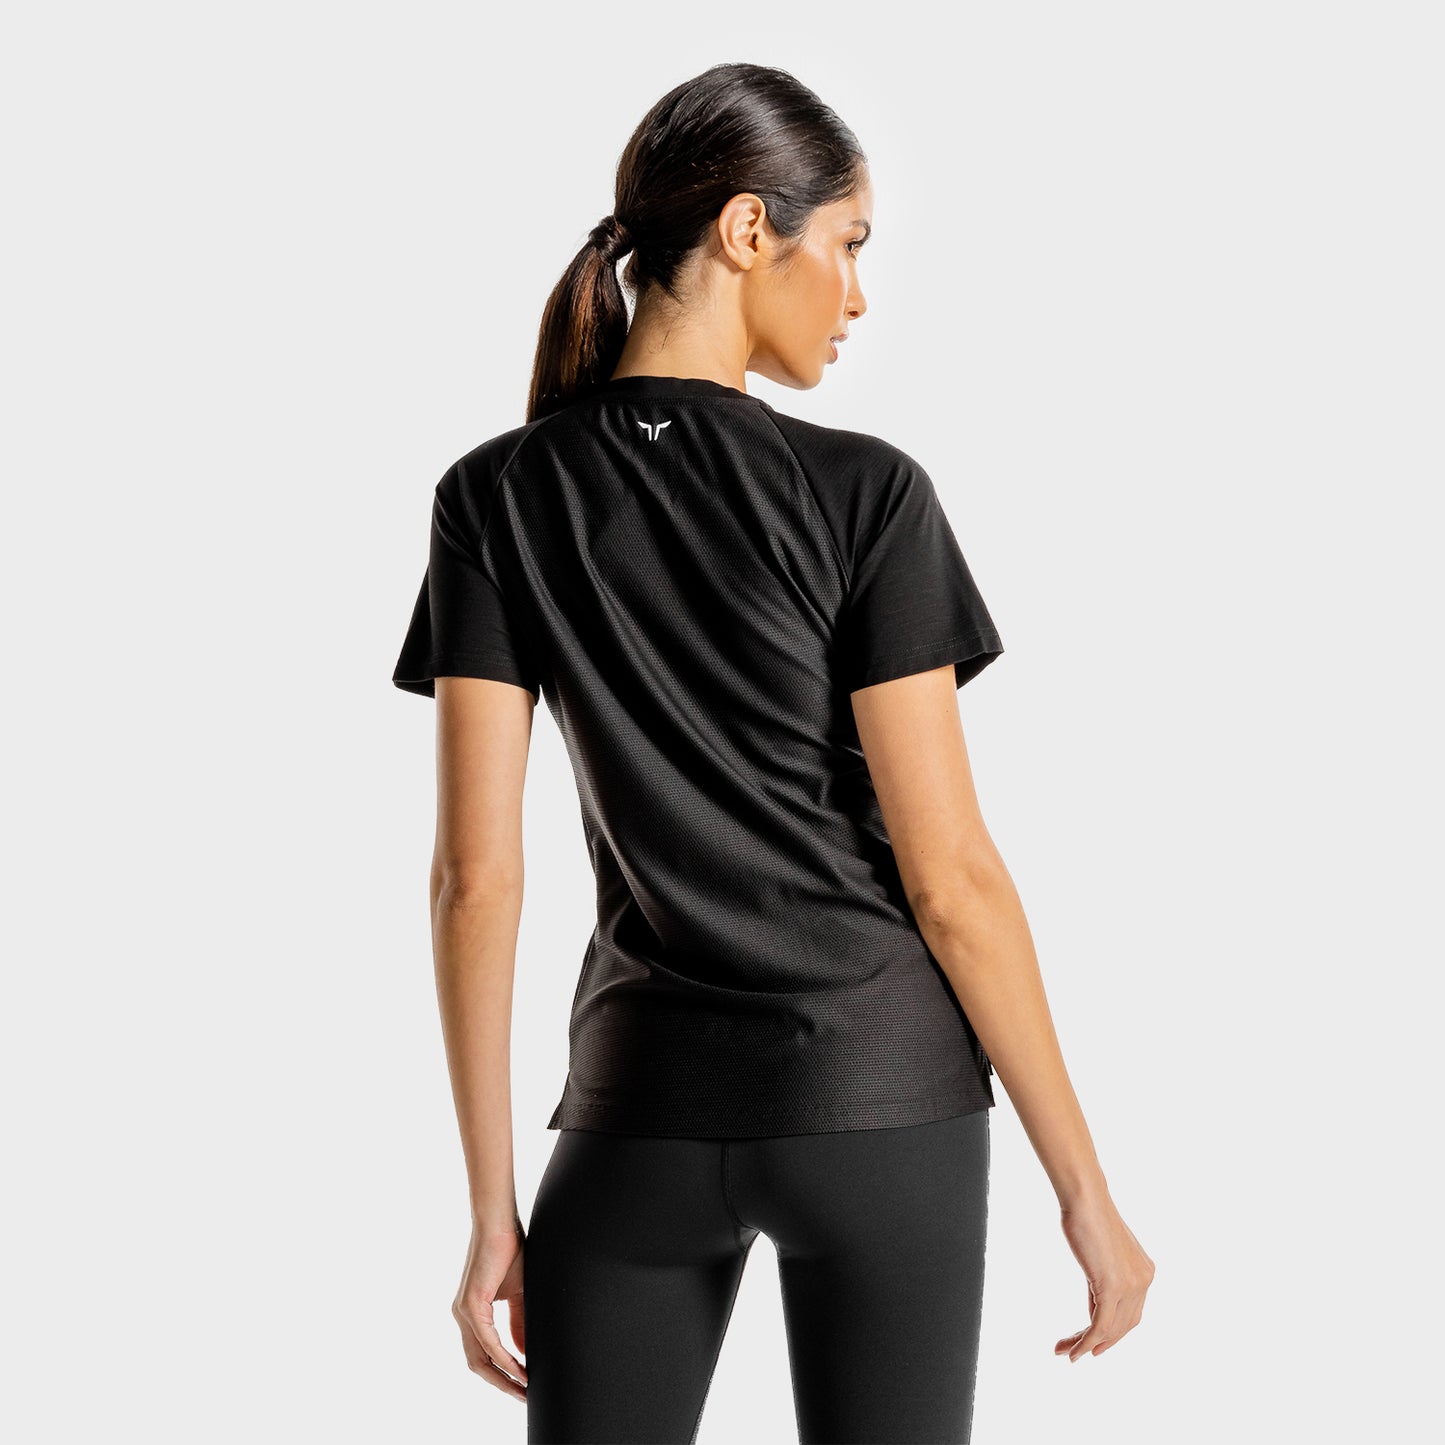 squatwolf-workout-clothes-core-slim-fit-tee-black-gym-t-shirts-for-women